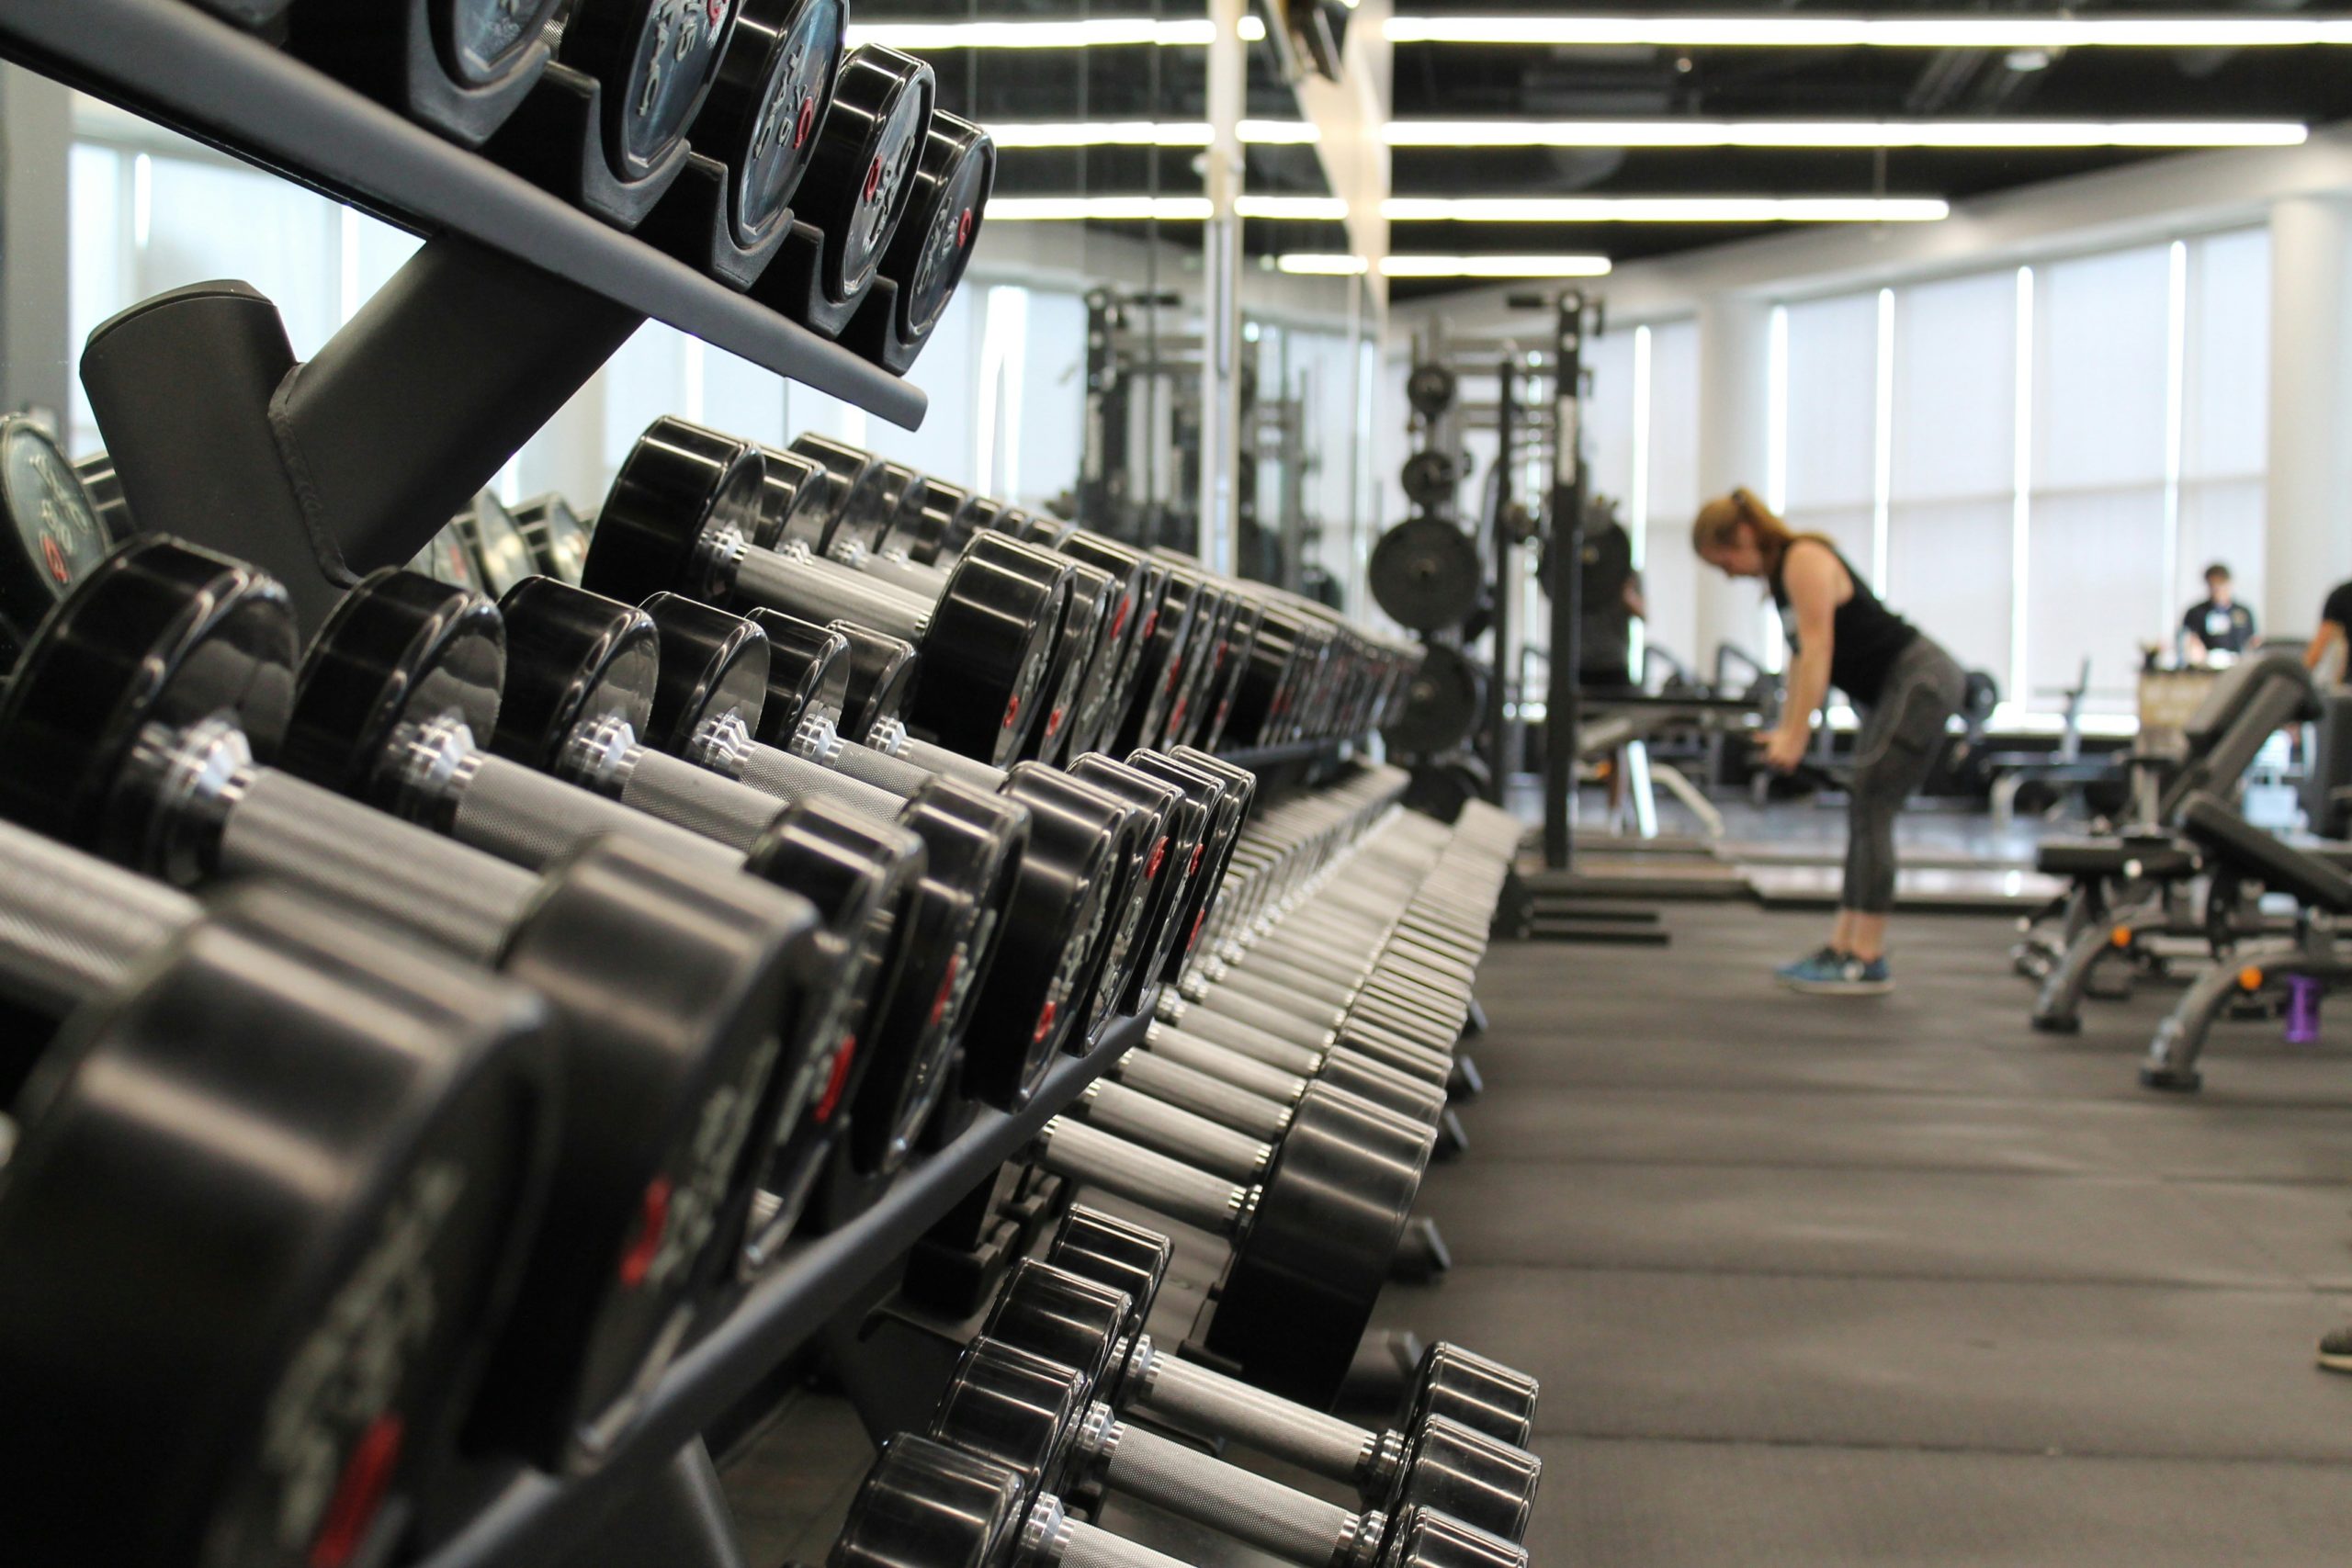 Discover the Best Fitness Centers in Cabot, AR Based on Reviews